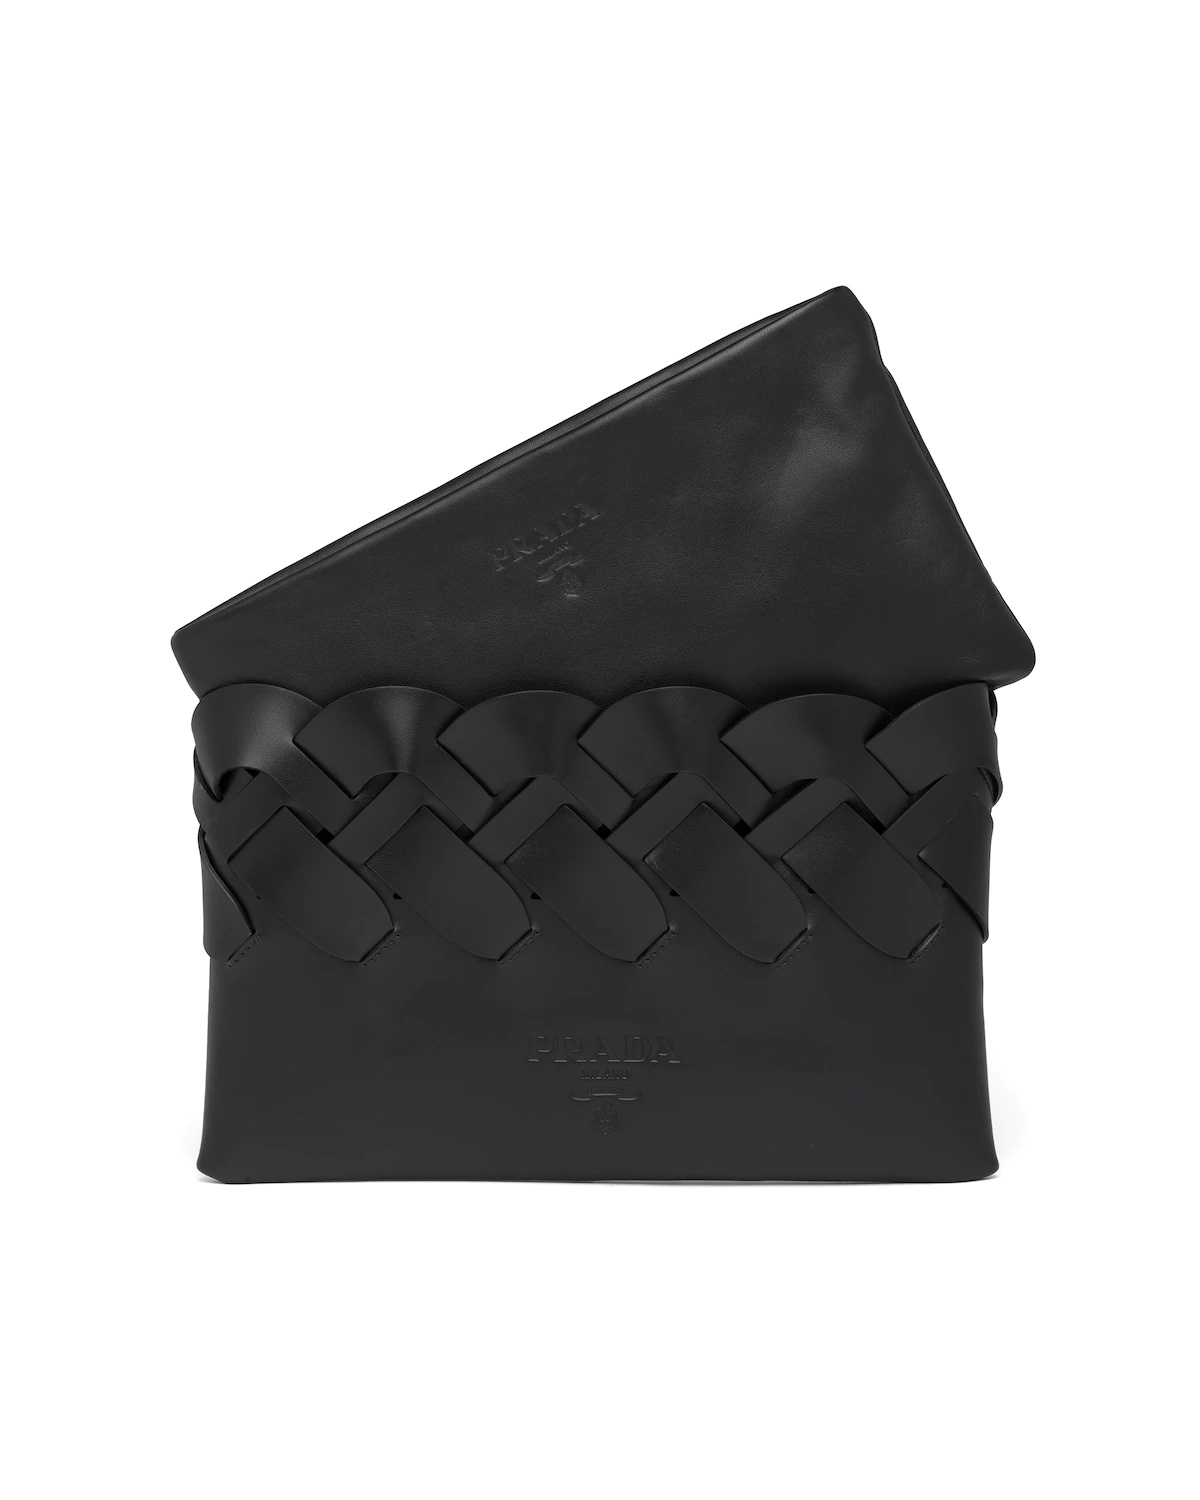 Prada Tress leather clutch with large woven motif - 6